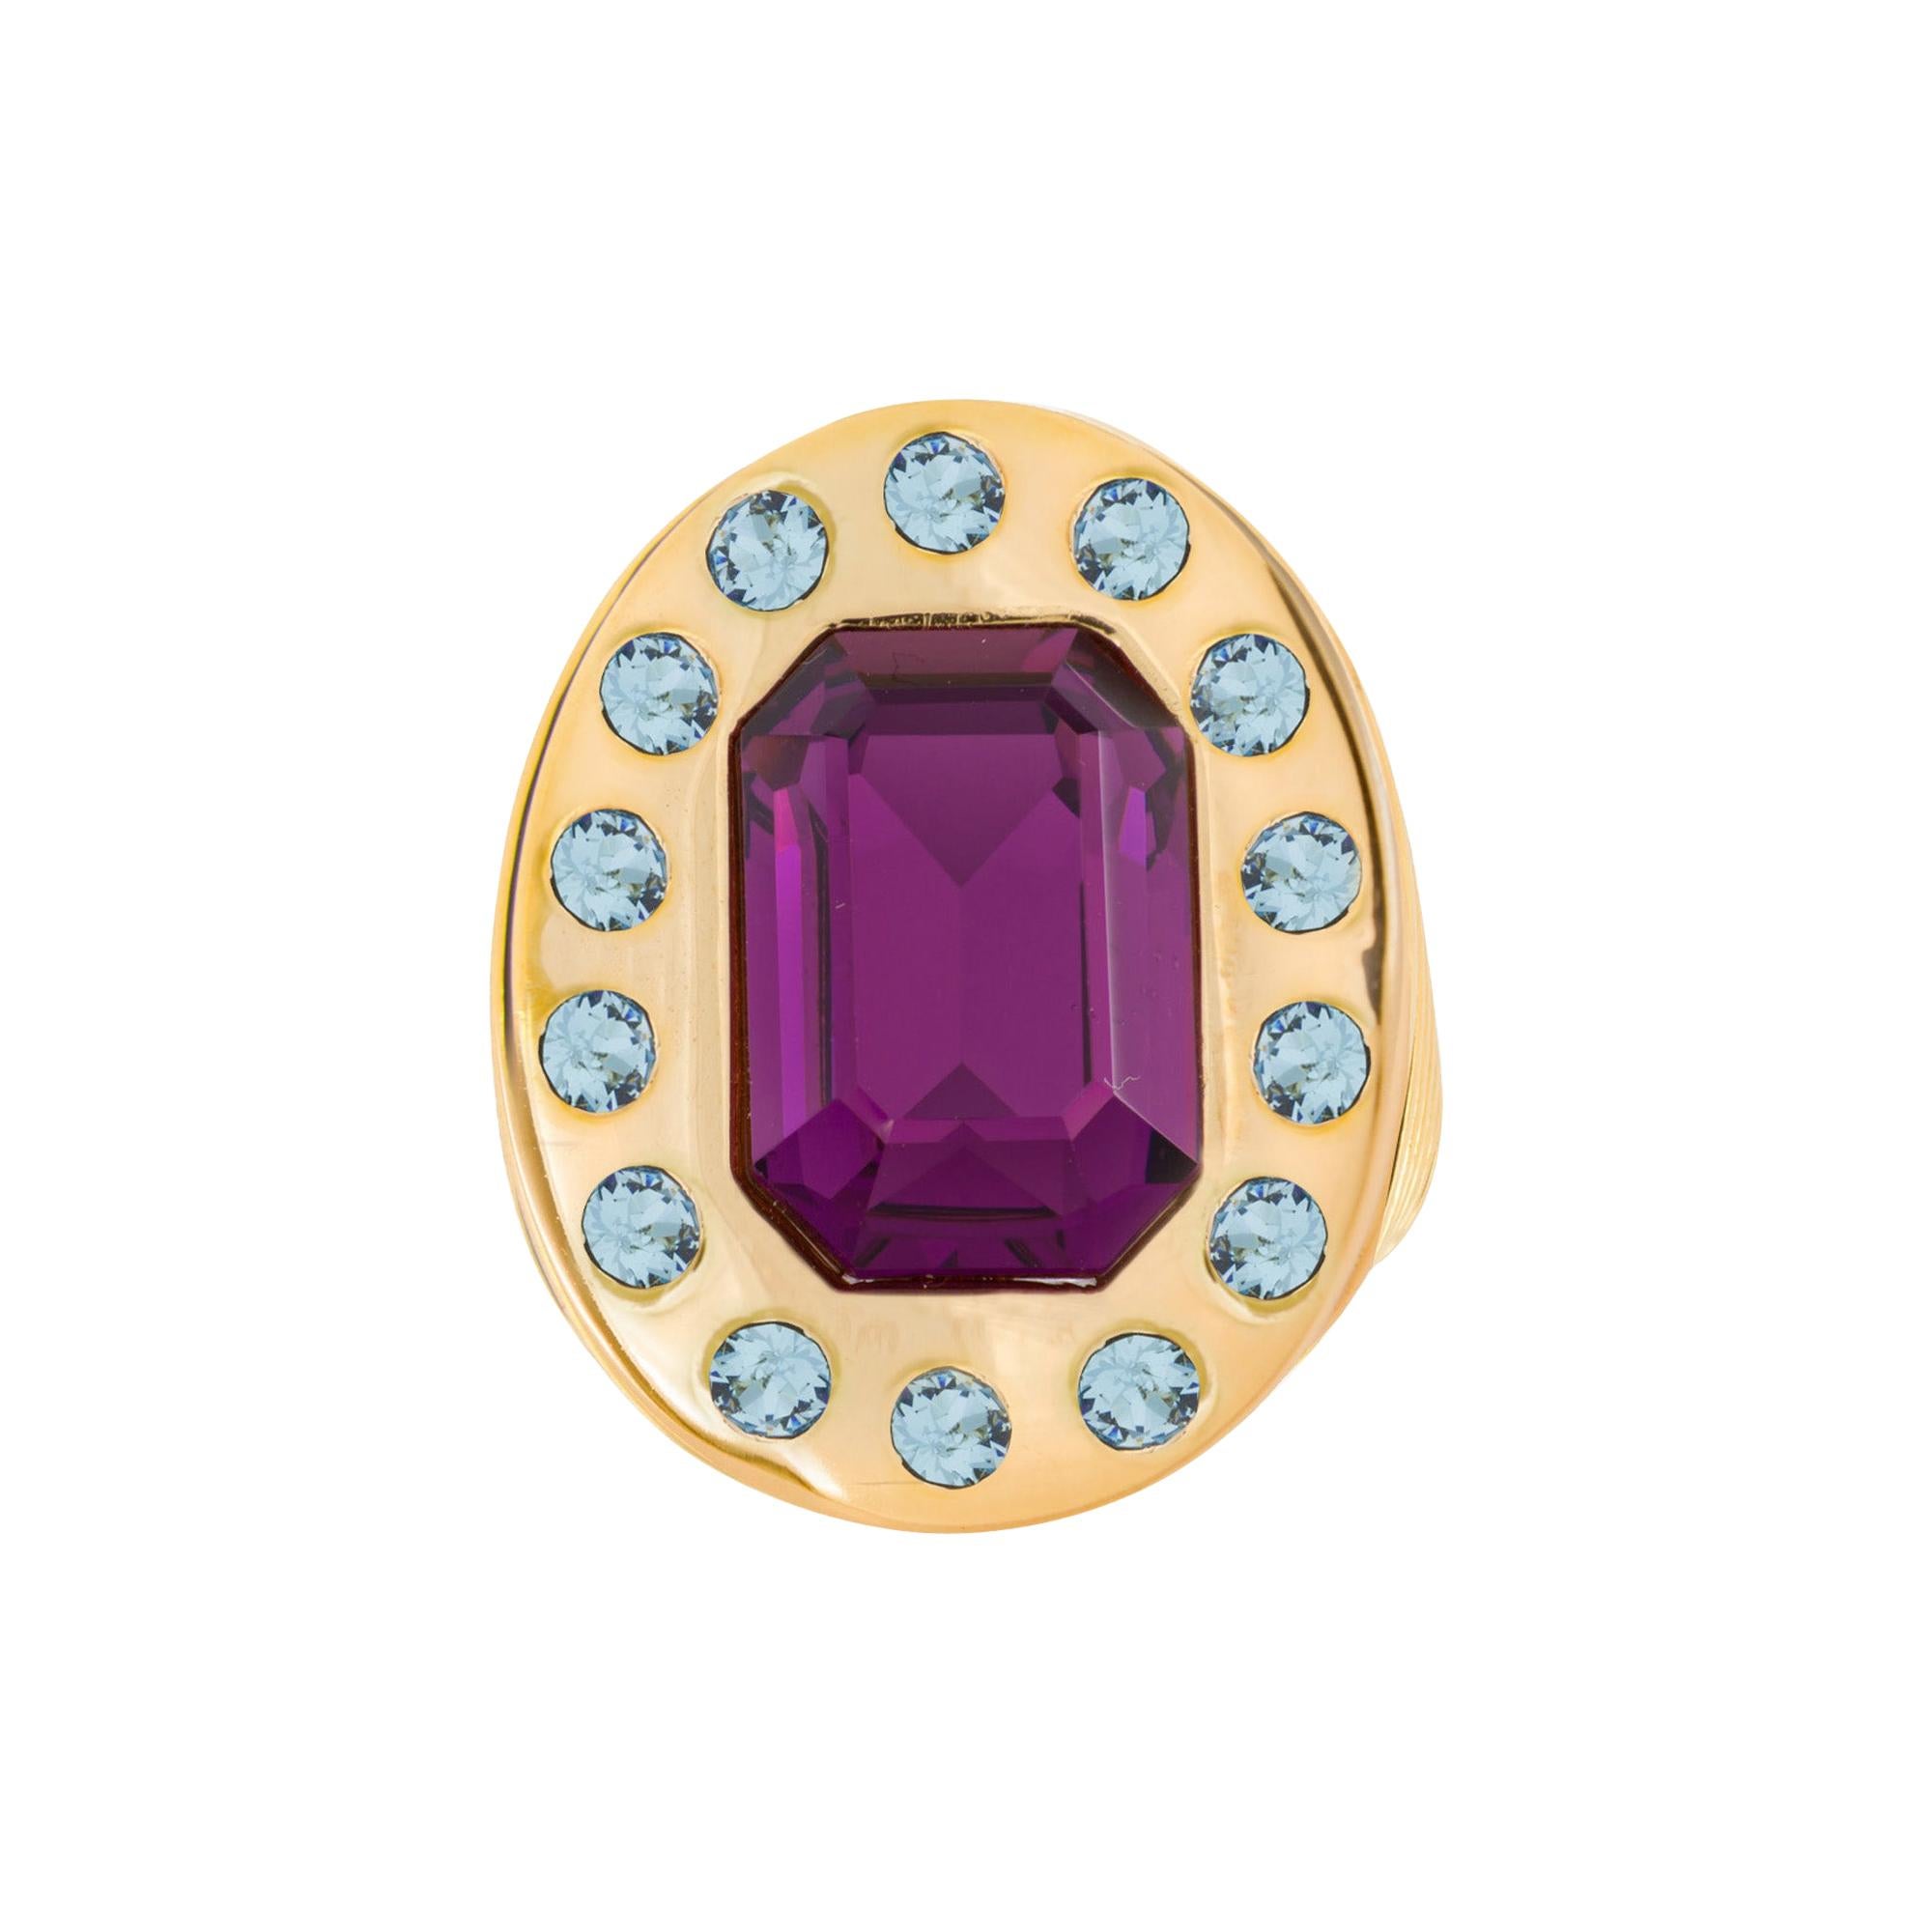 Sol Chevalier gold plated purple and light blue stones ring NWOT